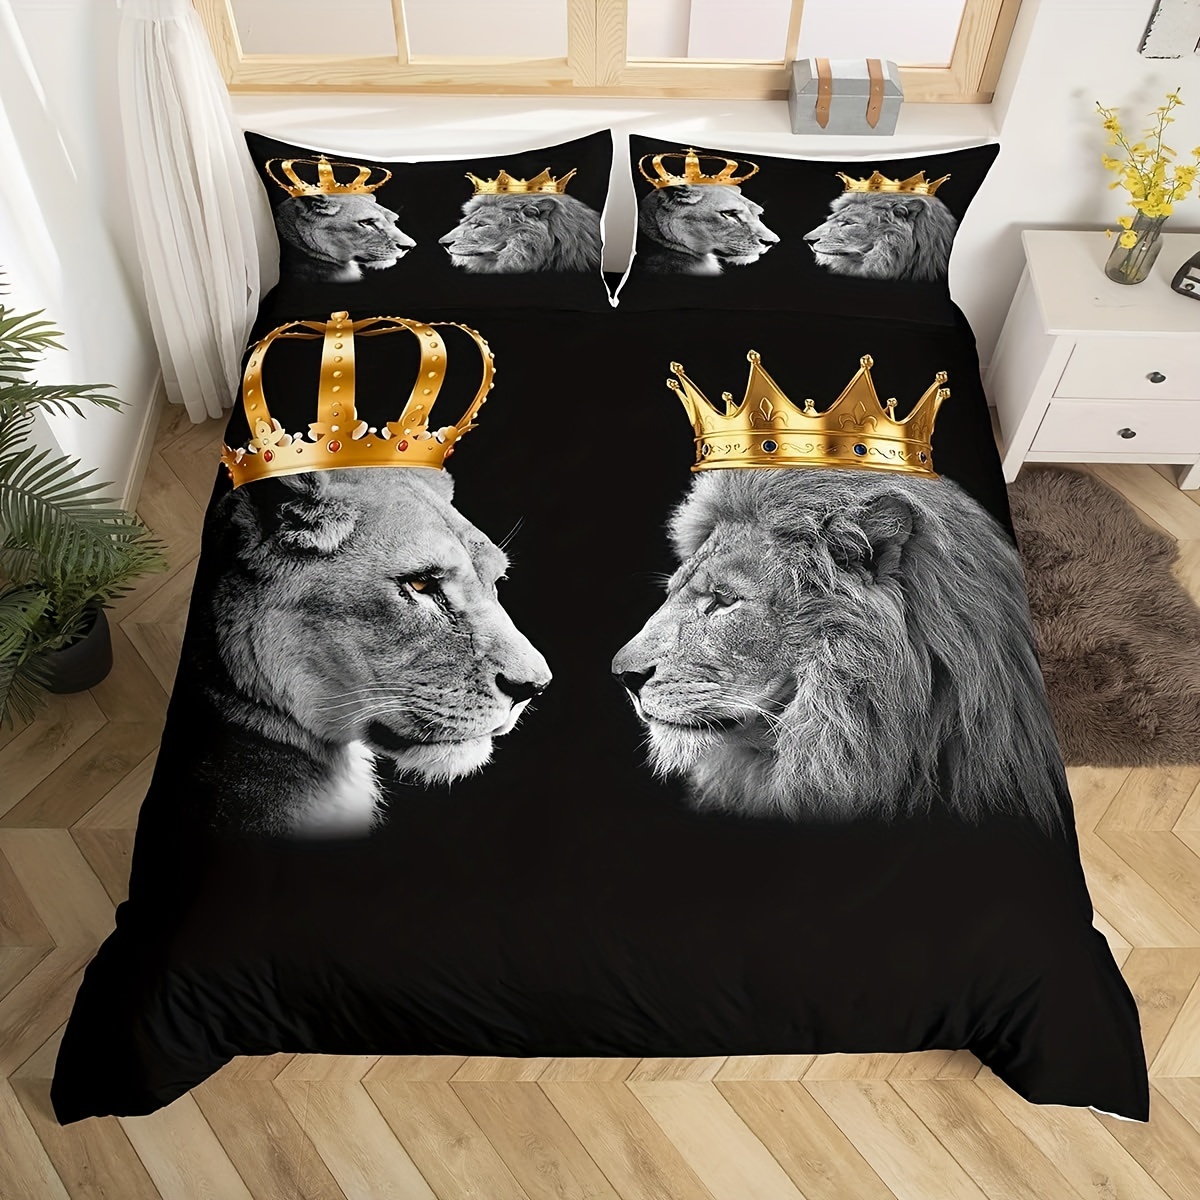 

3pcs Wild Lion Couple Bedding Set, Golden King And Queen Crown Duvet Cover Set For Bedroom Present, Tropical African Animal Microfiber Duvet Cover With 2 Pillowcases, Without Core